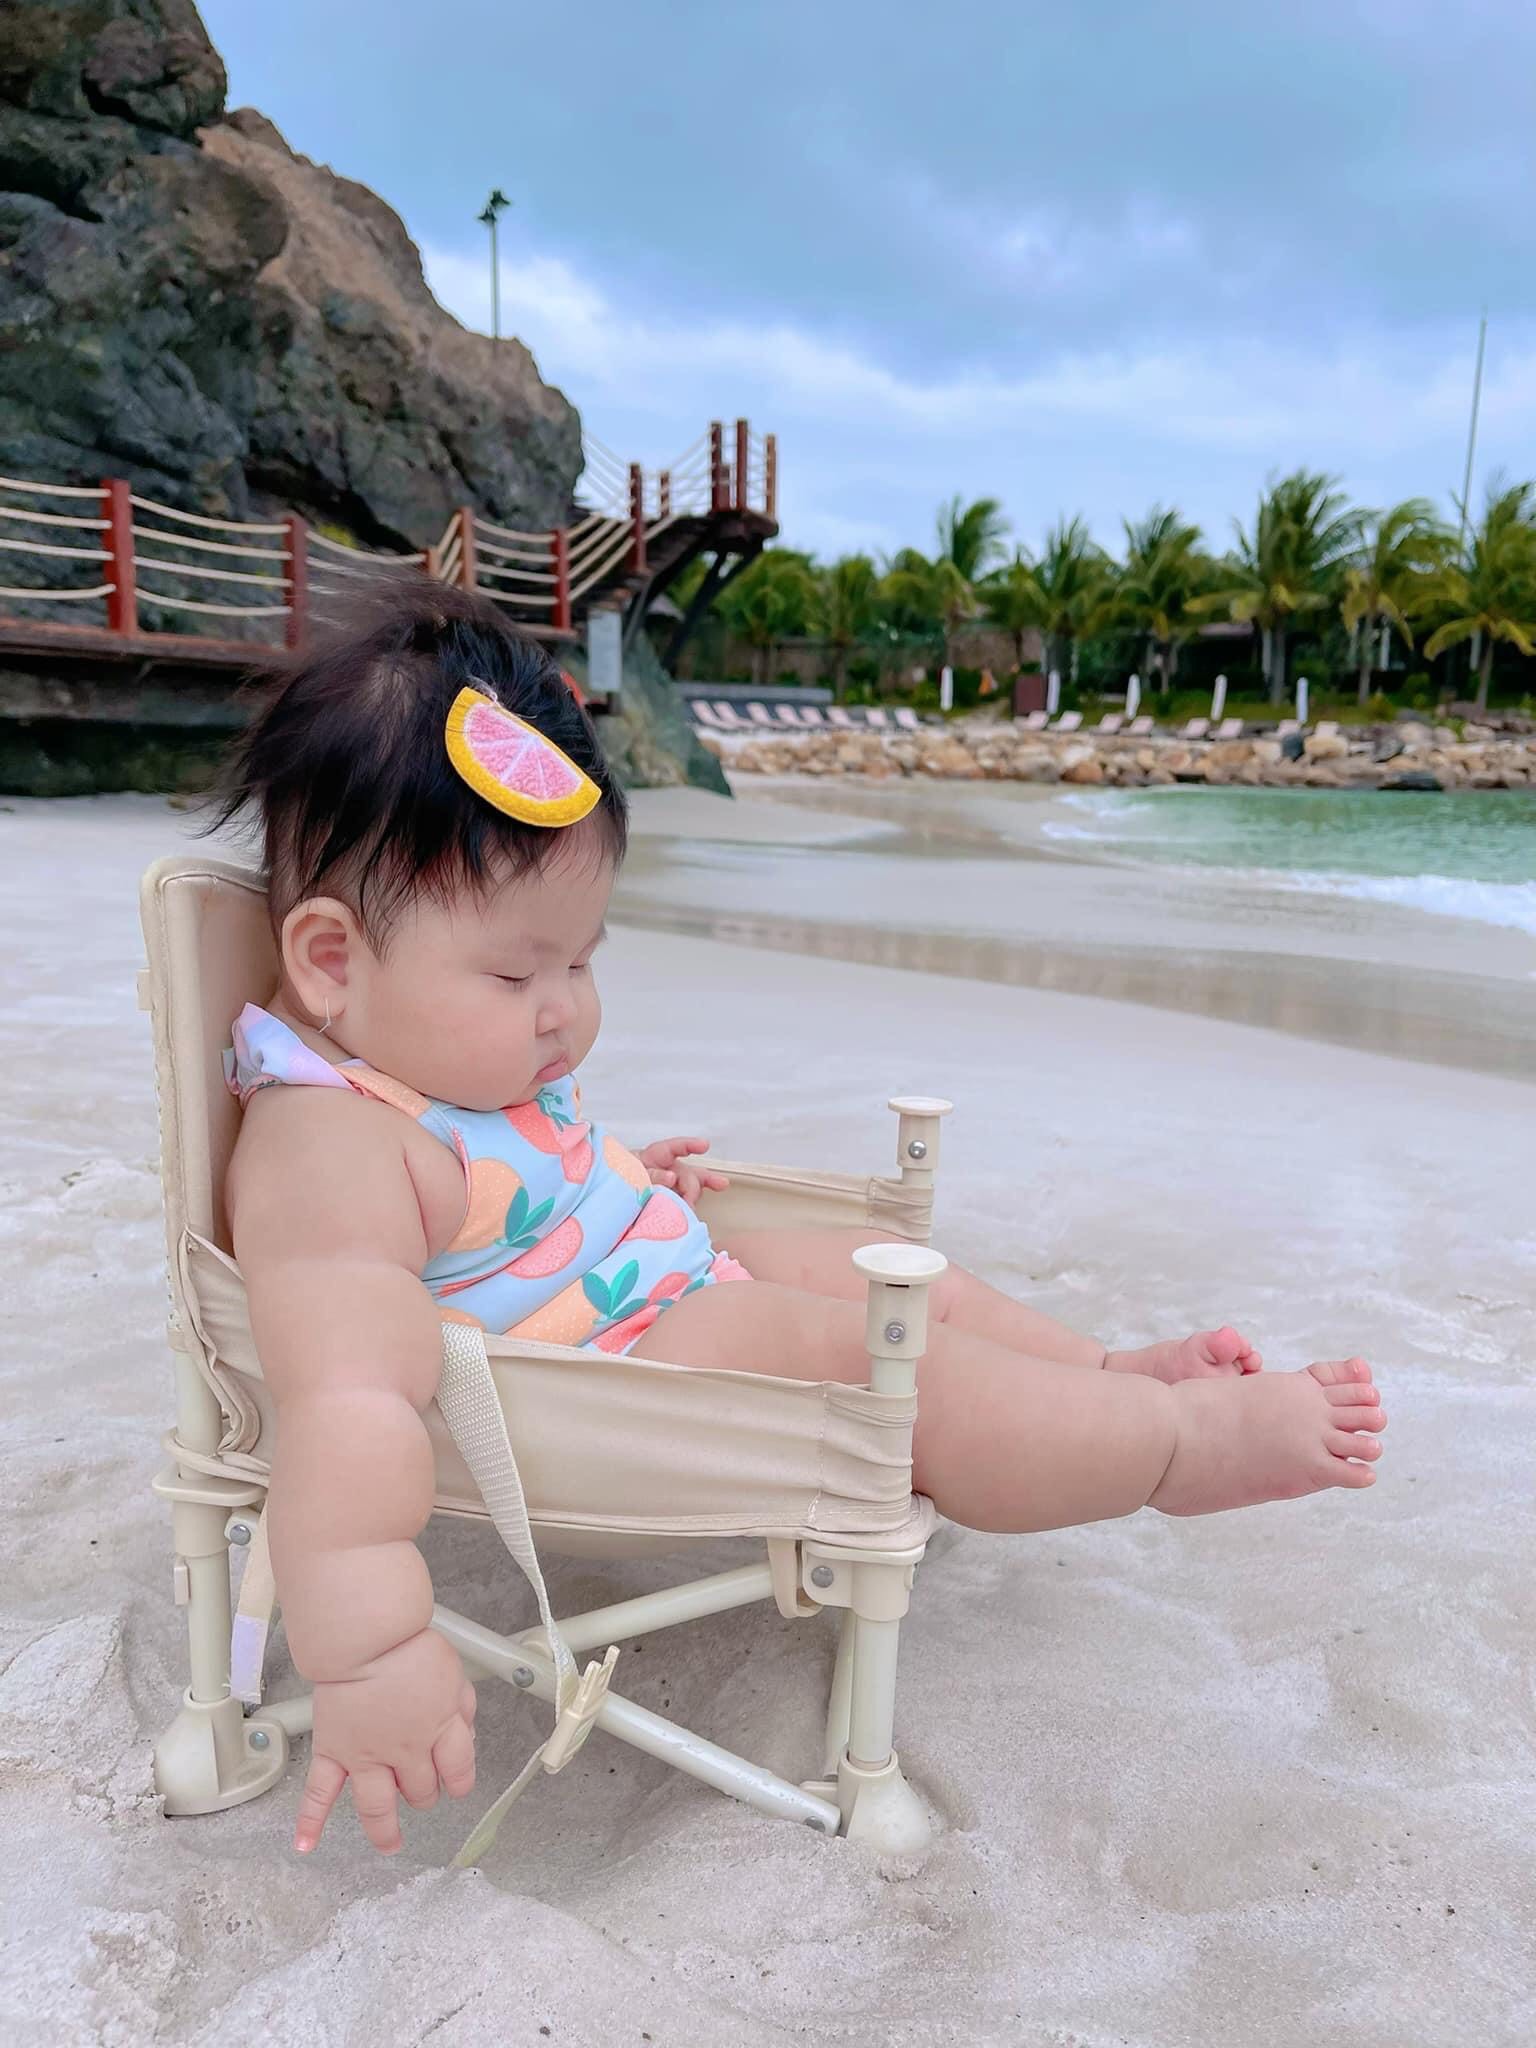 While swimming, sleepiness came suddenly, a 7-month-old baby made netizens feverish when he fell asleep on the beach of Nha Trang - Photo 3.